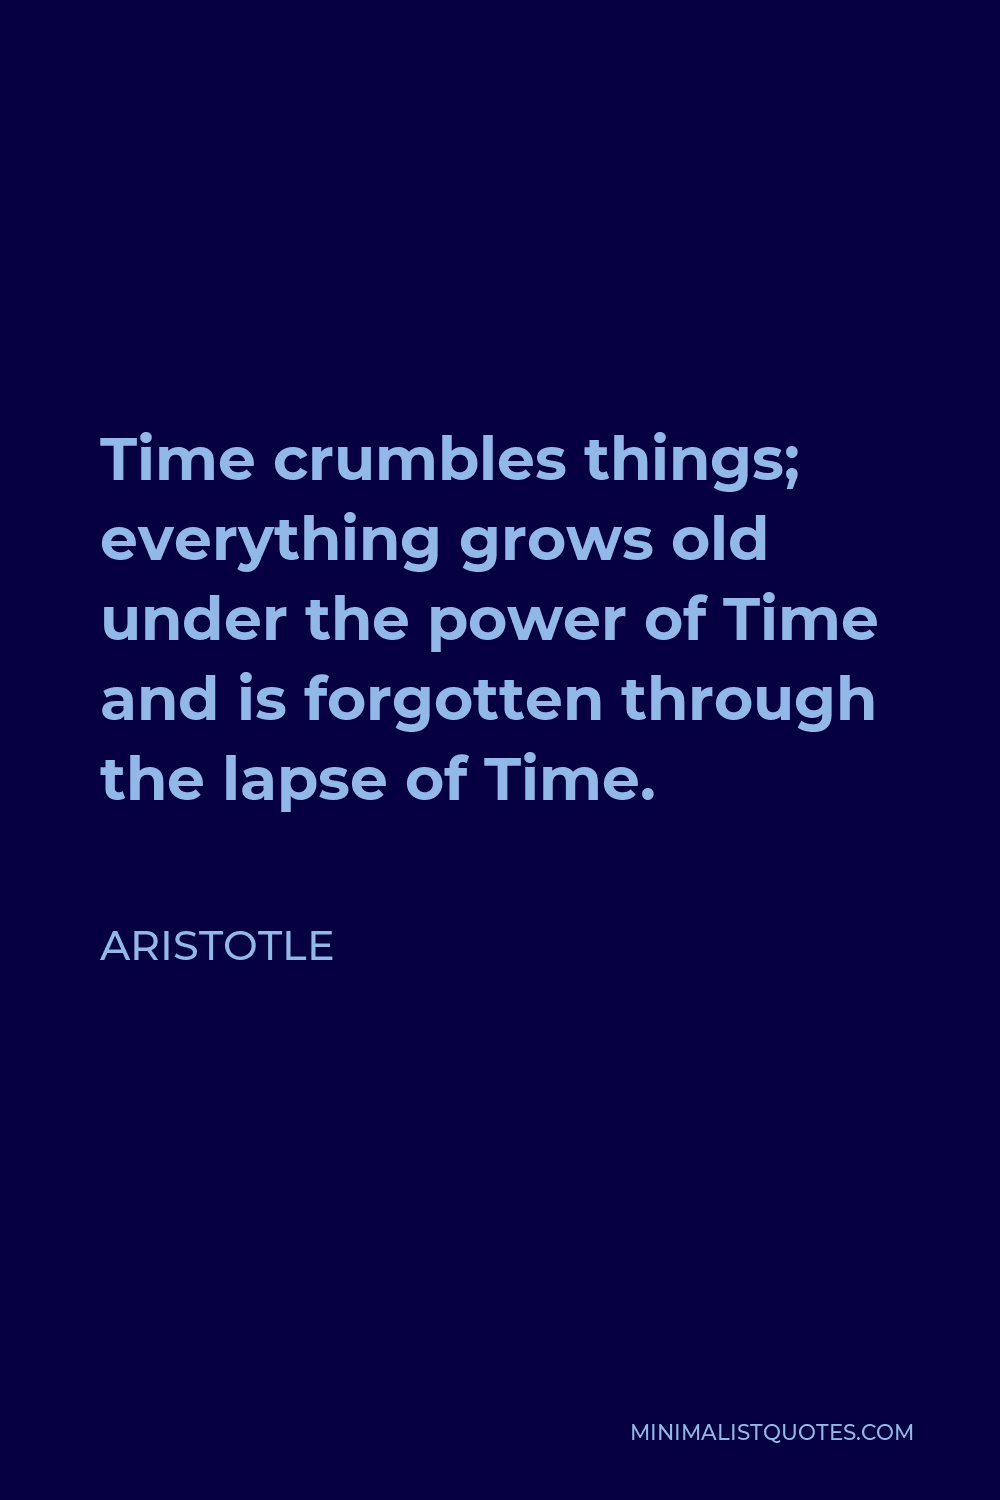 Aristotle Quote - Time crumbles things; everything grows old under the power of Time and is forgotten through the lapse of Time.